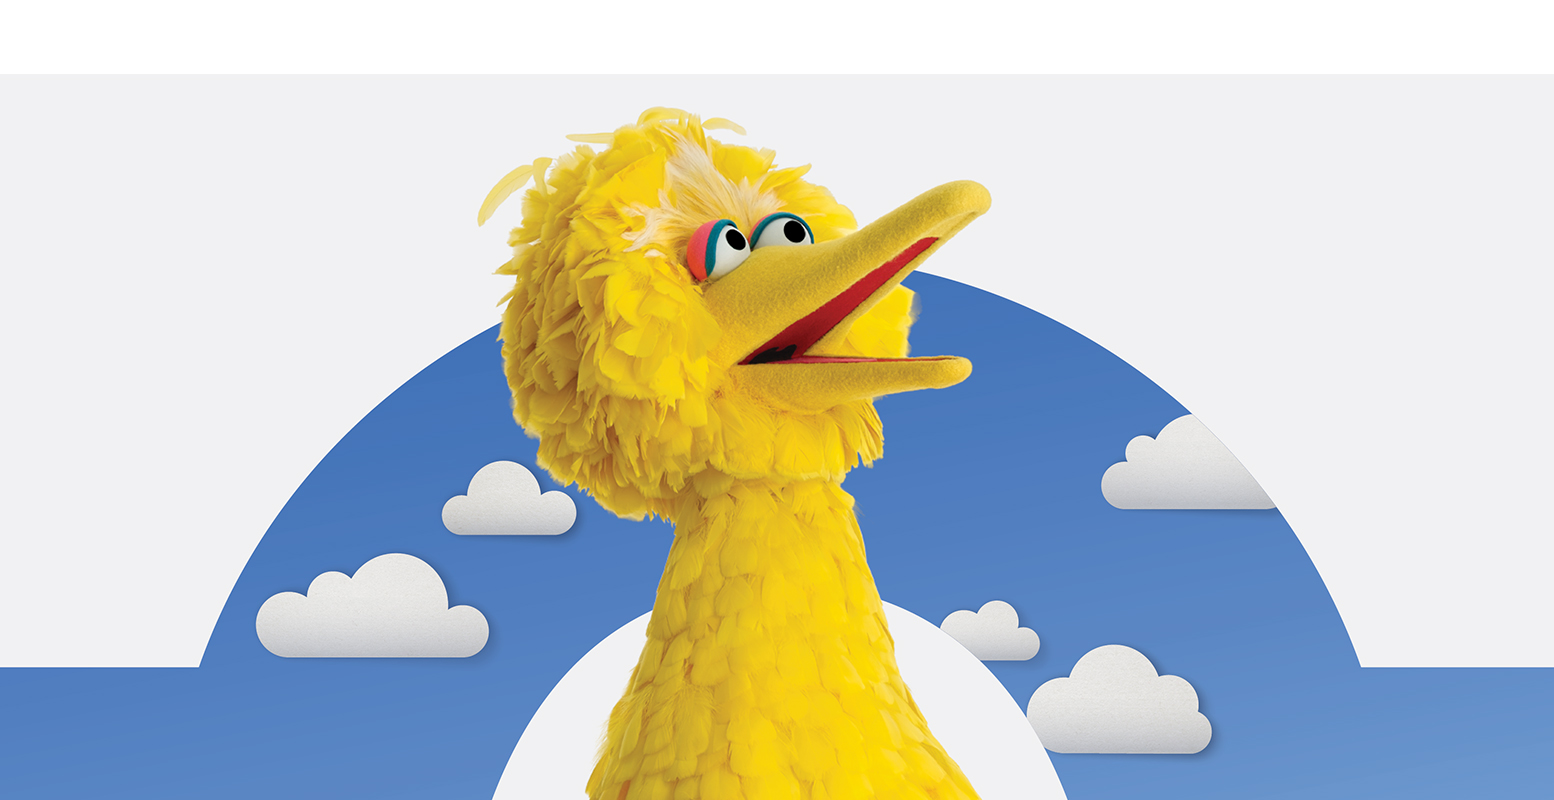 Big Bird in front of clouds.